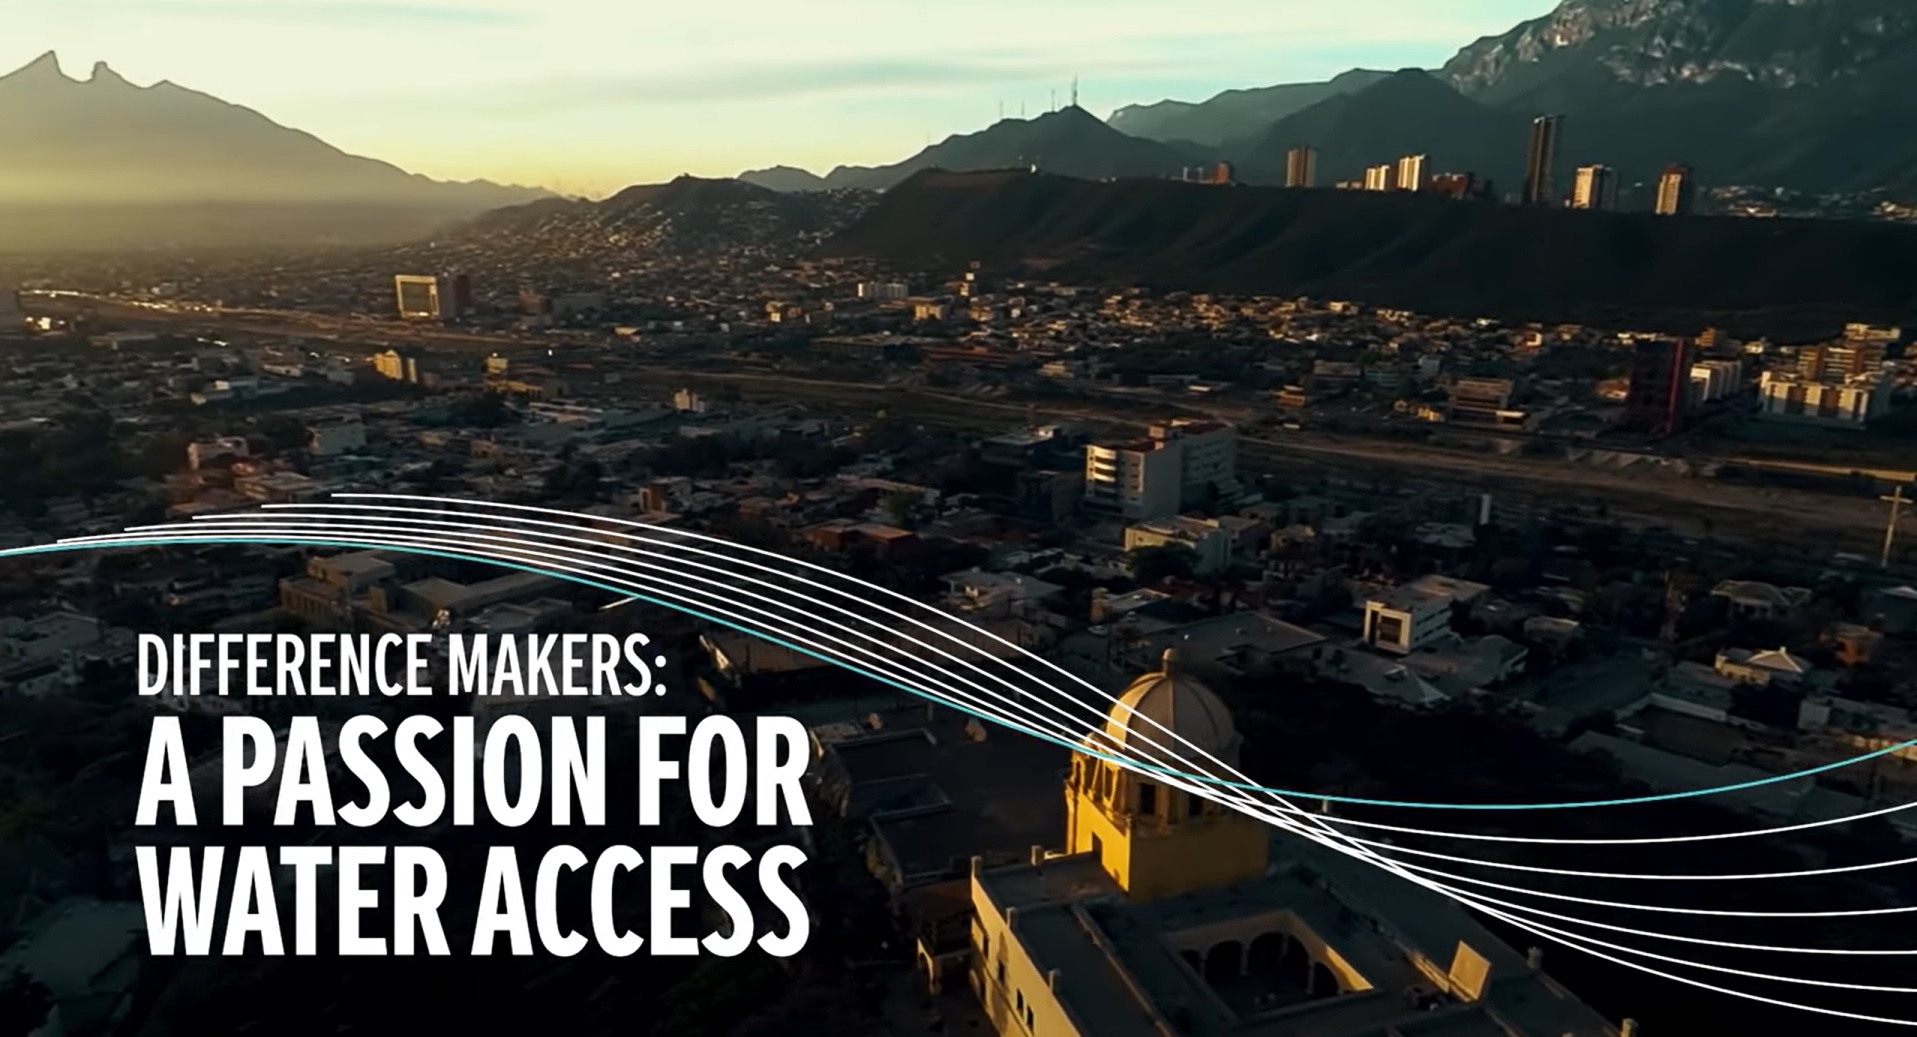 Difference Makers: A Passion for Water Access